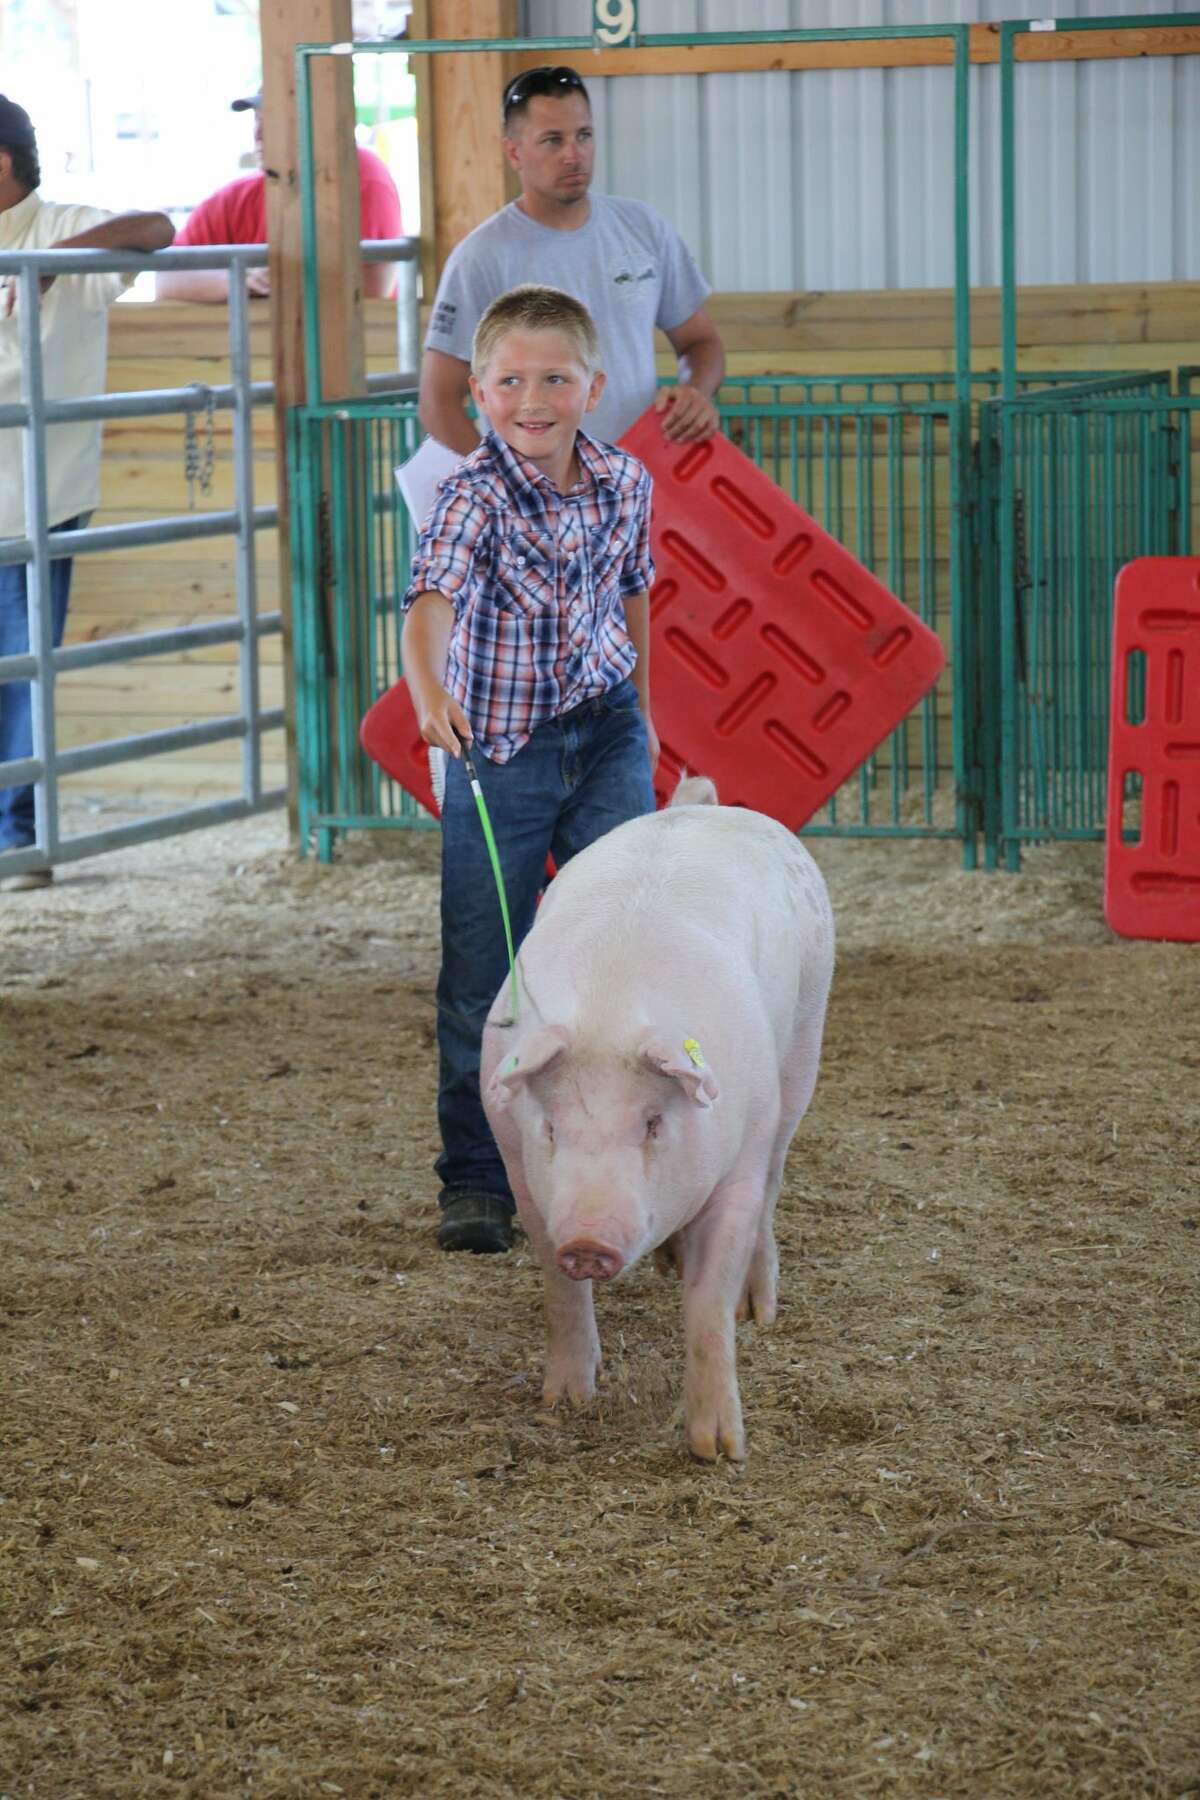 Livestock shows Tuesday at the Huron Community Fair included dairy, swine and rabbits.